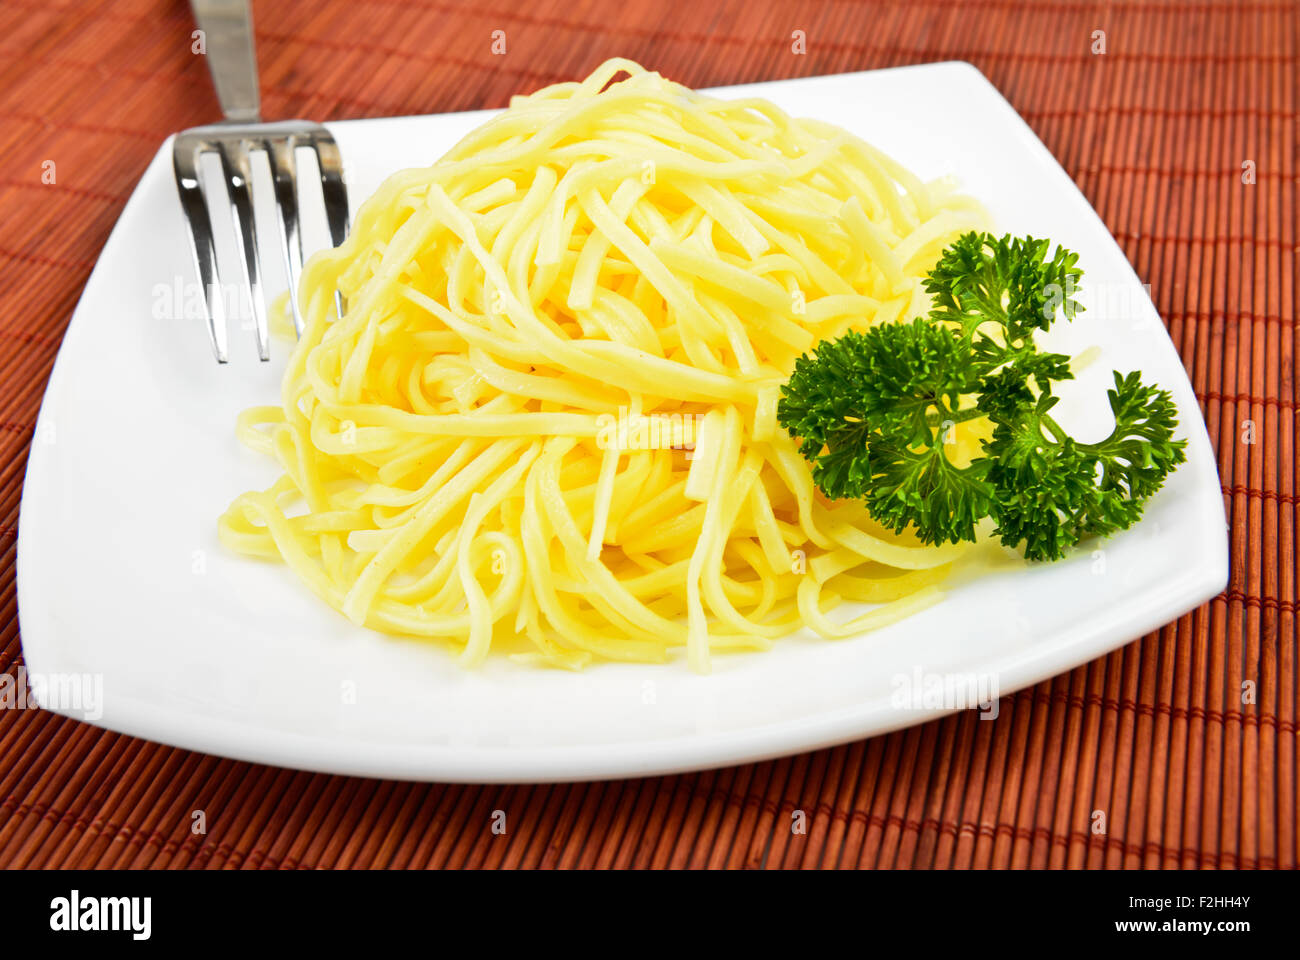 spaghetti pasta on plate with fork Stock Photo